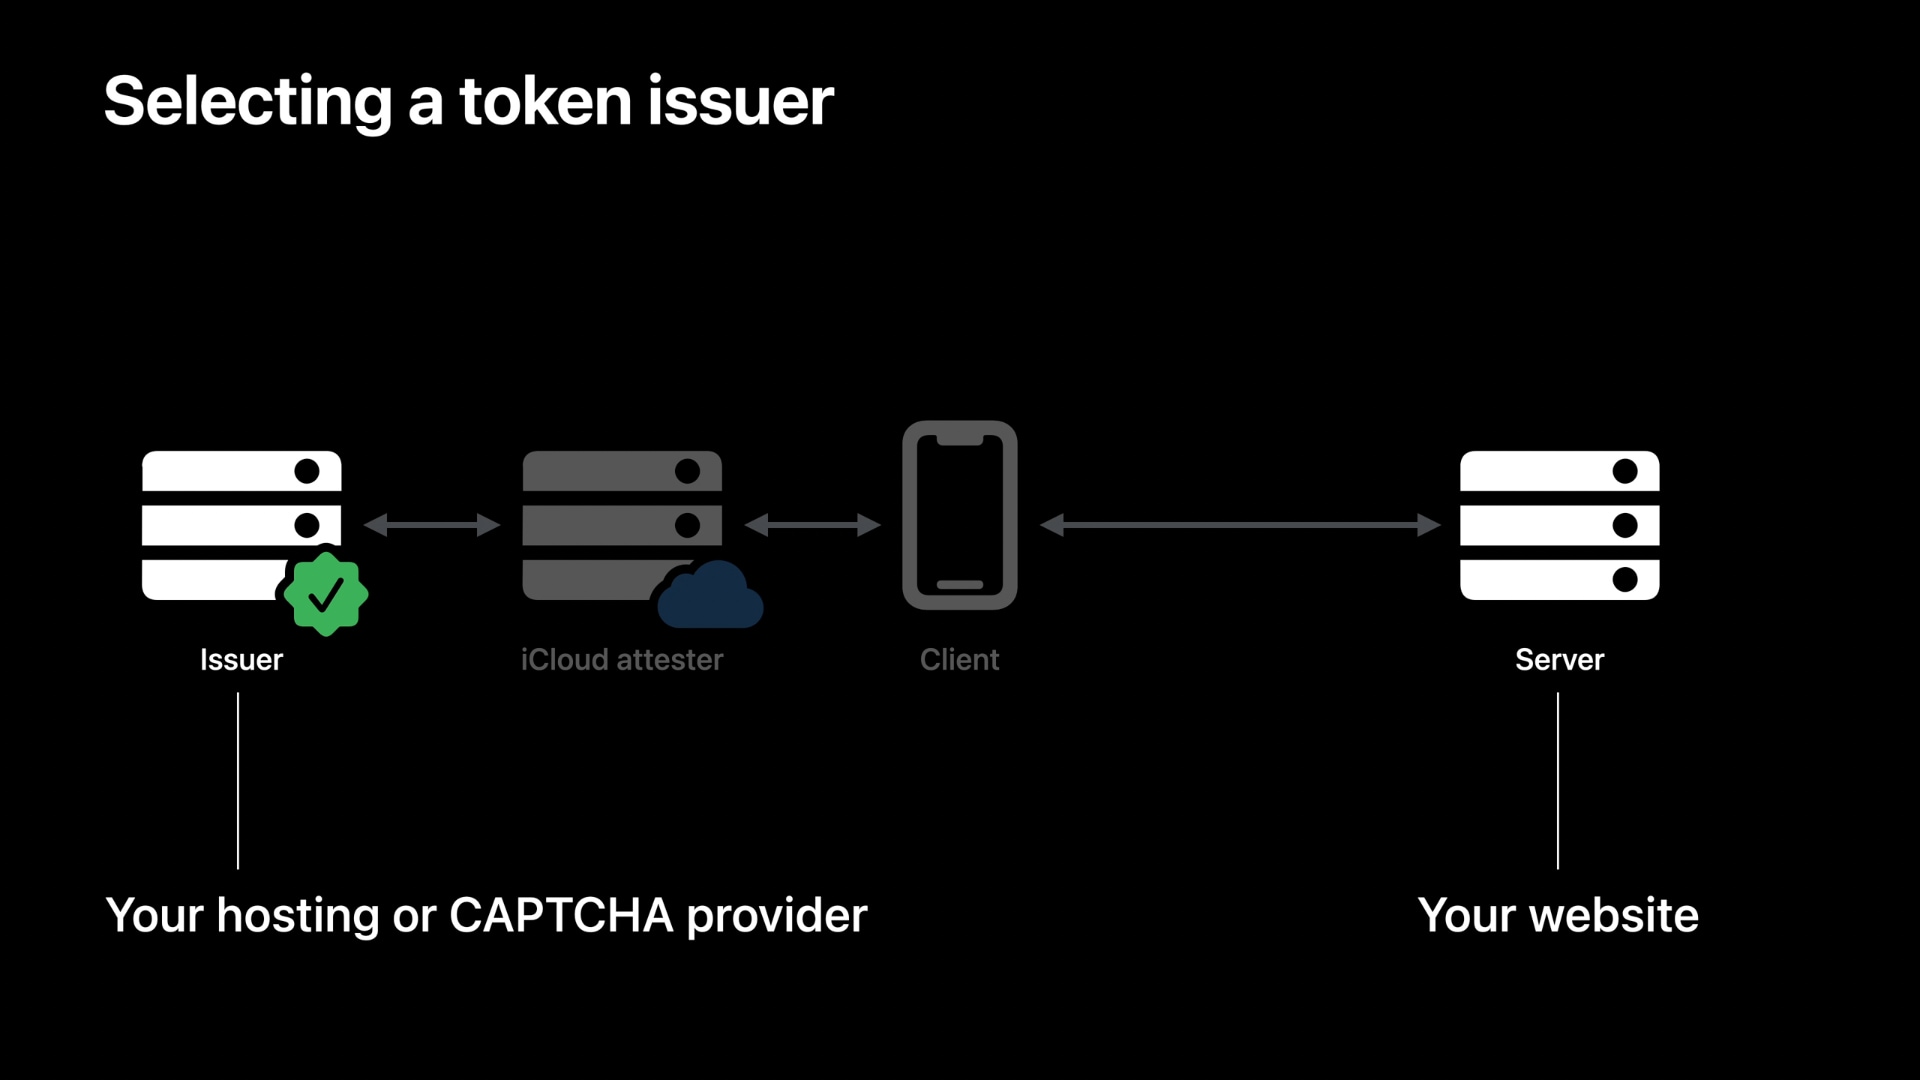 Apple's illustration showing how private access tokens make CAPTCHA-less automatic verification in apps and on websites possible